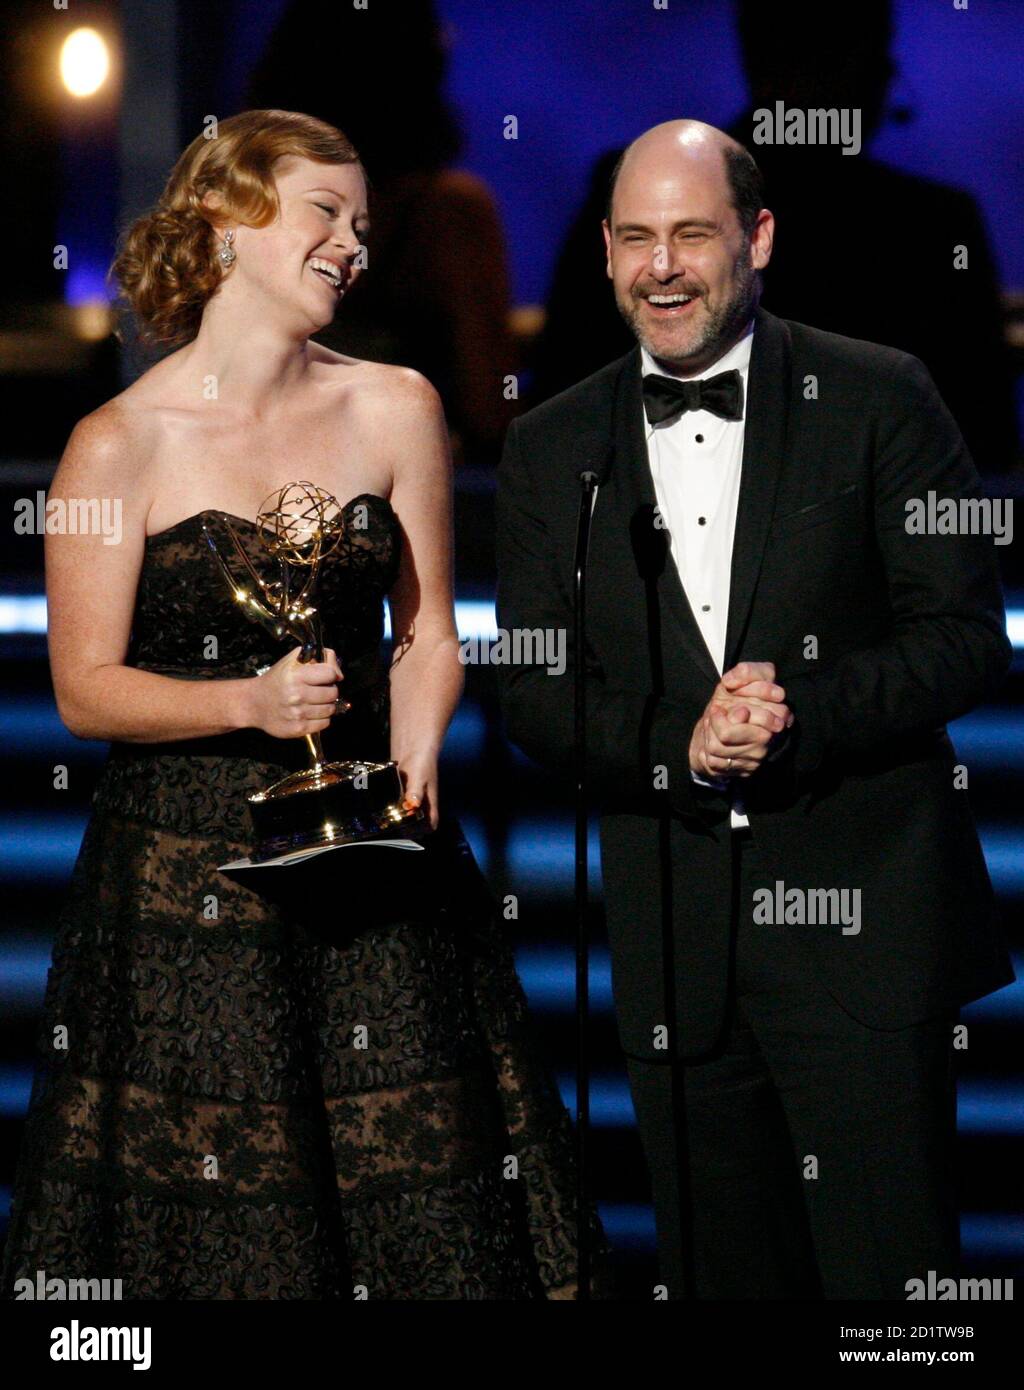 Writers Kater Gordon and Matthew Weiner accept the award outstanding writing a drama series for "Mad Men" at the 61st annual Primetime Emmy Awards in Los Angeles, California September 20,